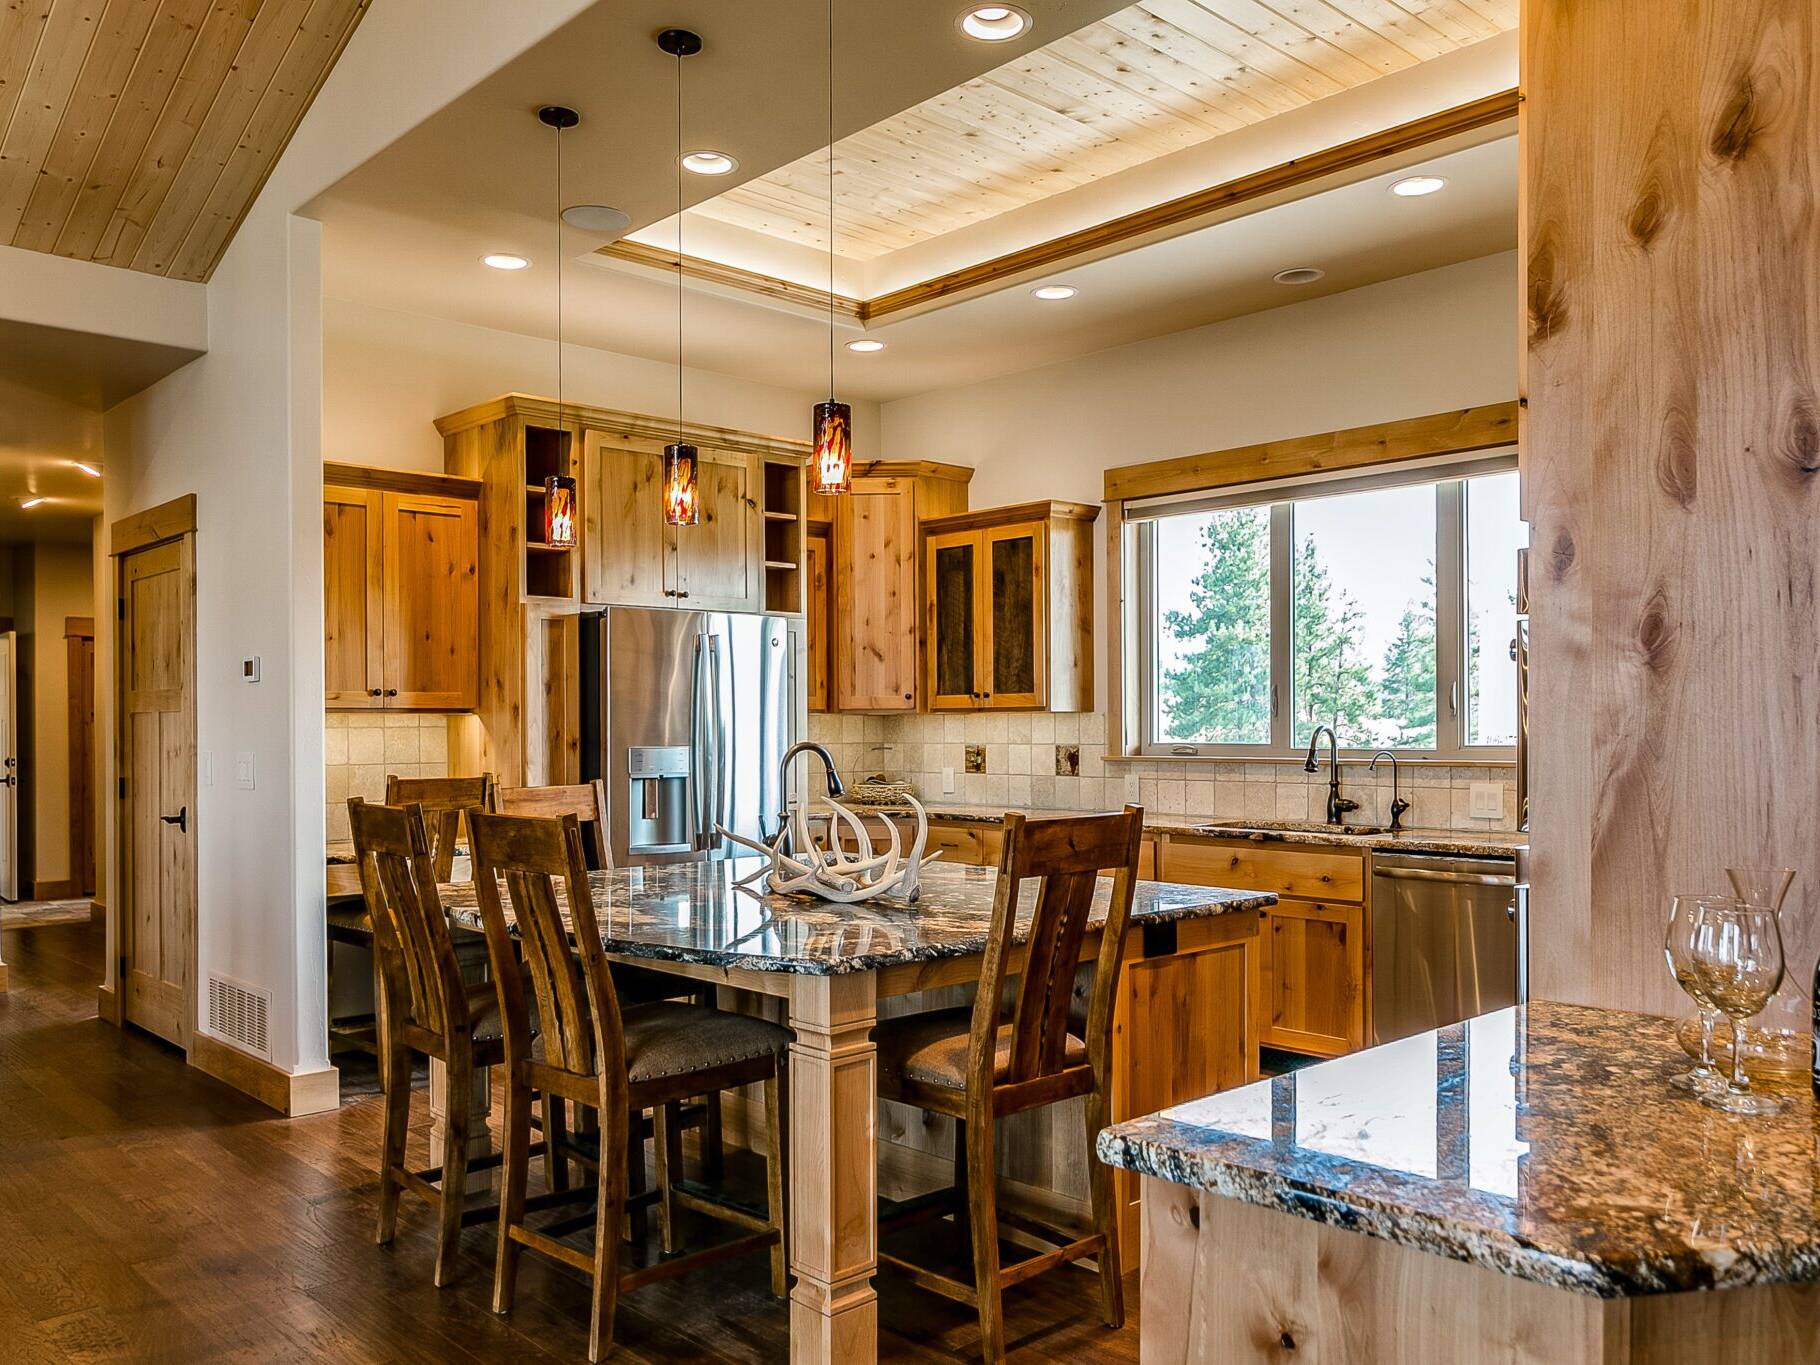 Kitchen with tray ceiling with T&G pine, rustic alder cabinets, granite countertops, and wood floor in a custom home built by Big Sky Builders near Stevensville, Montana